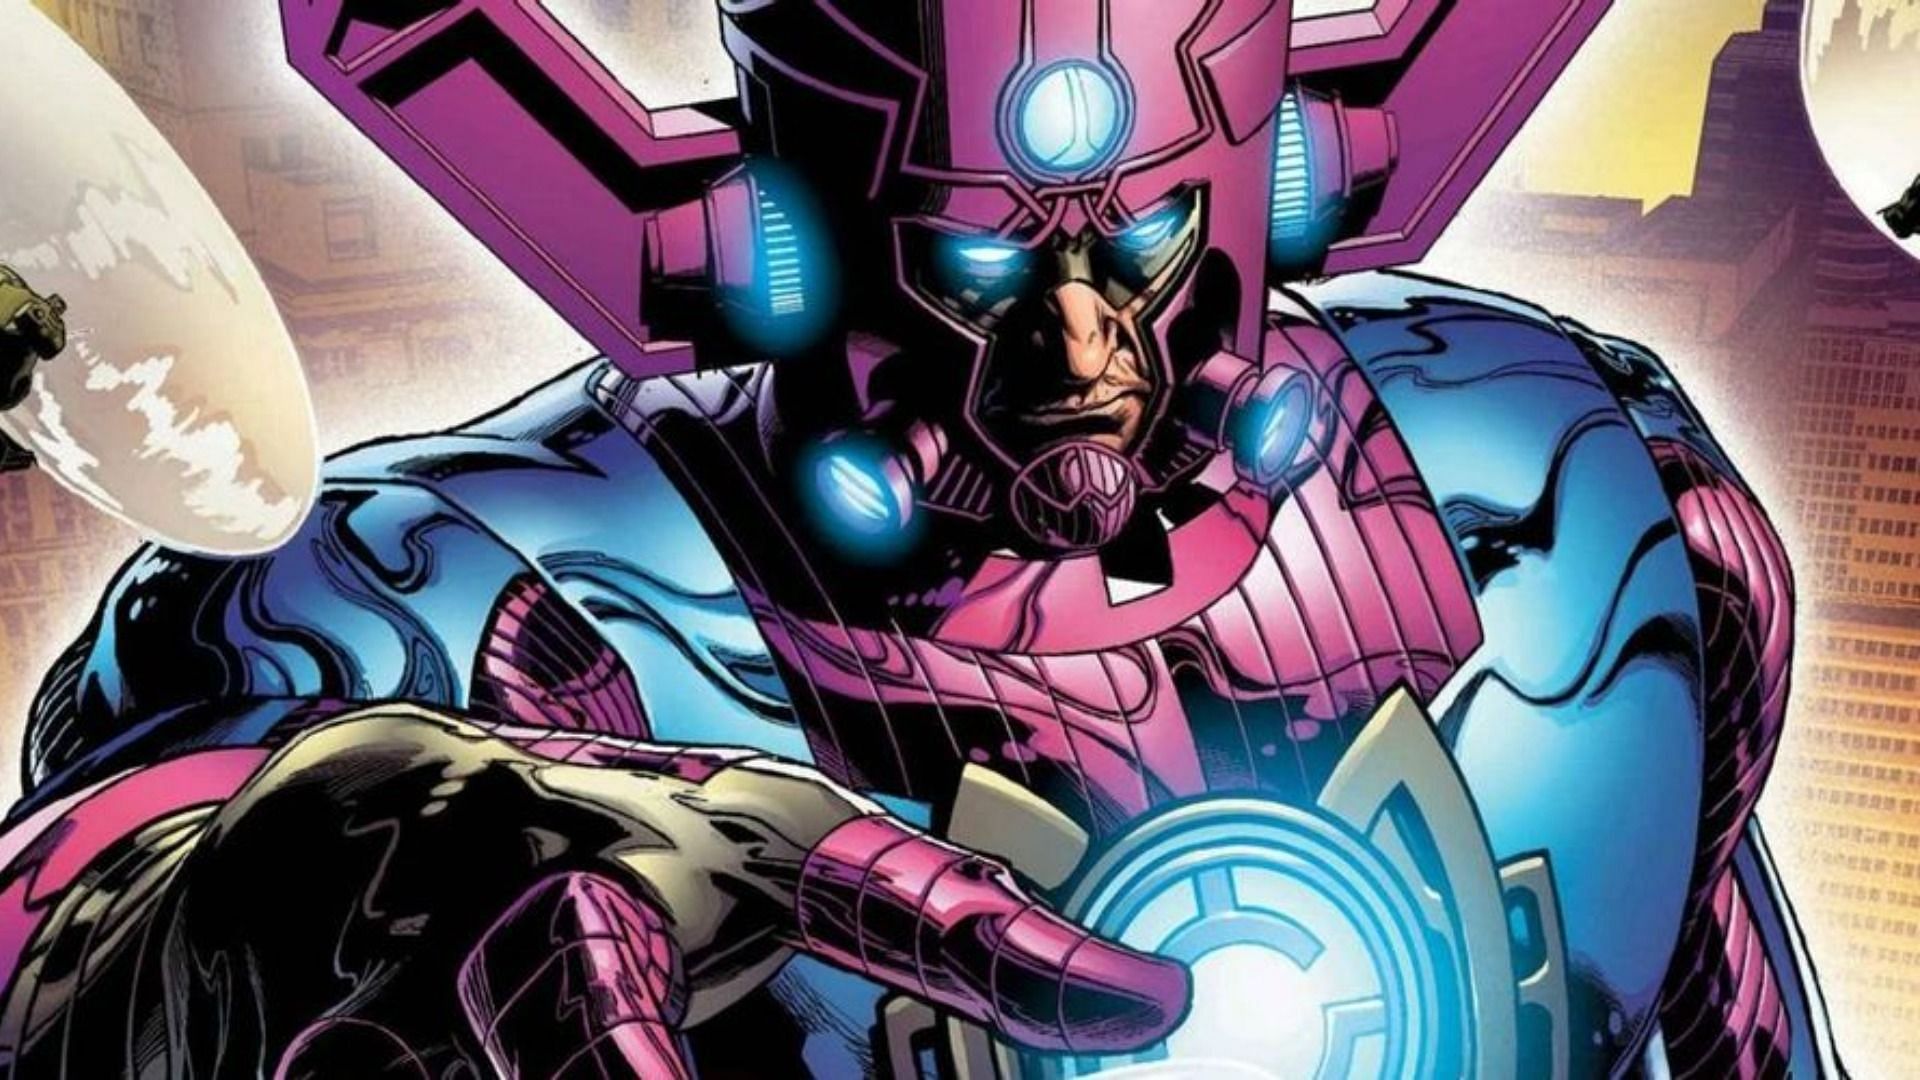 Galactus consumes planets to increase his powers (Image via Marvel)